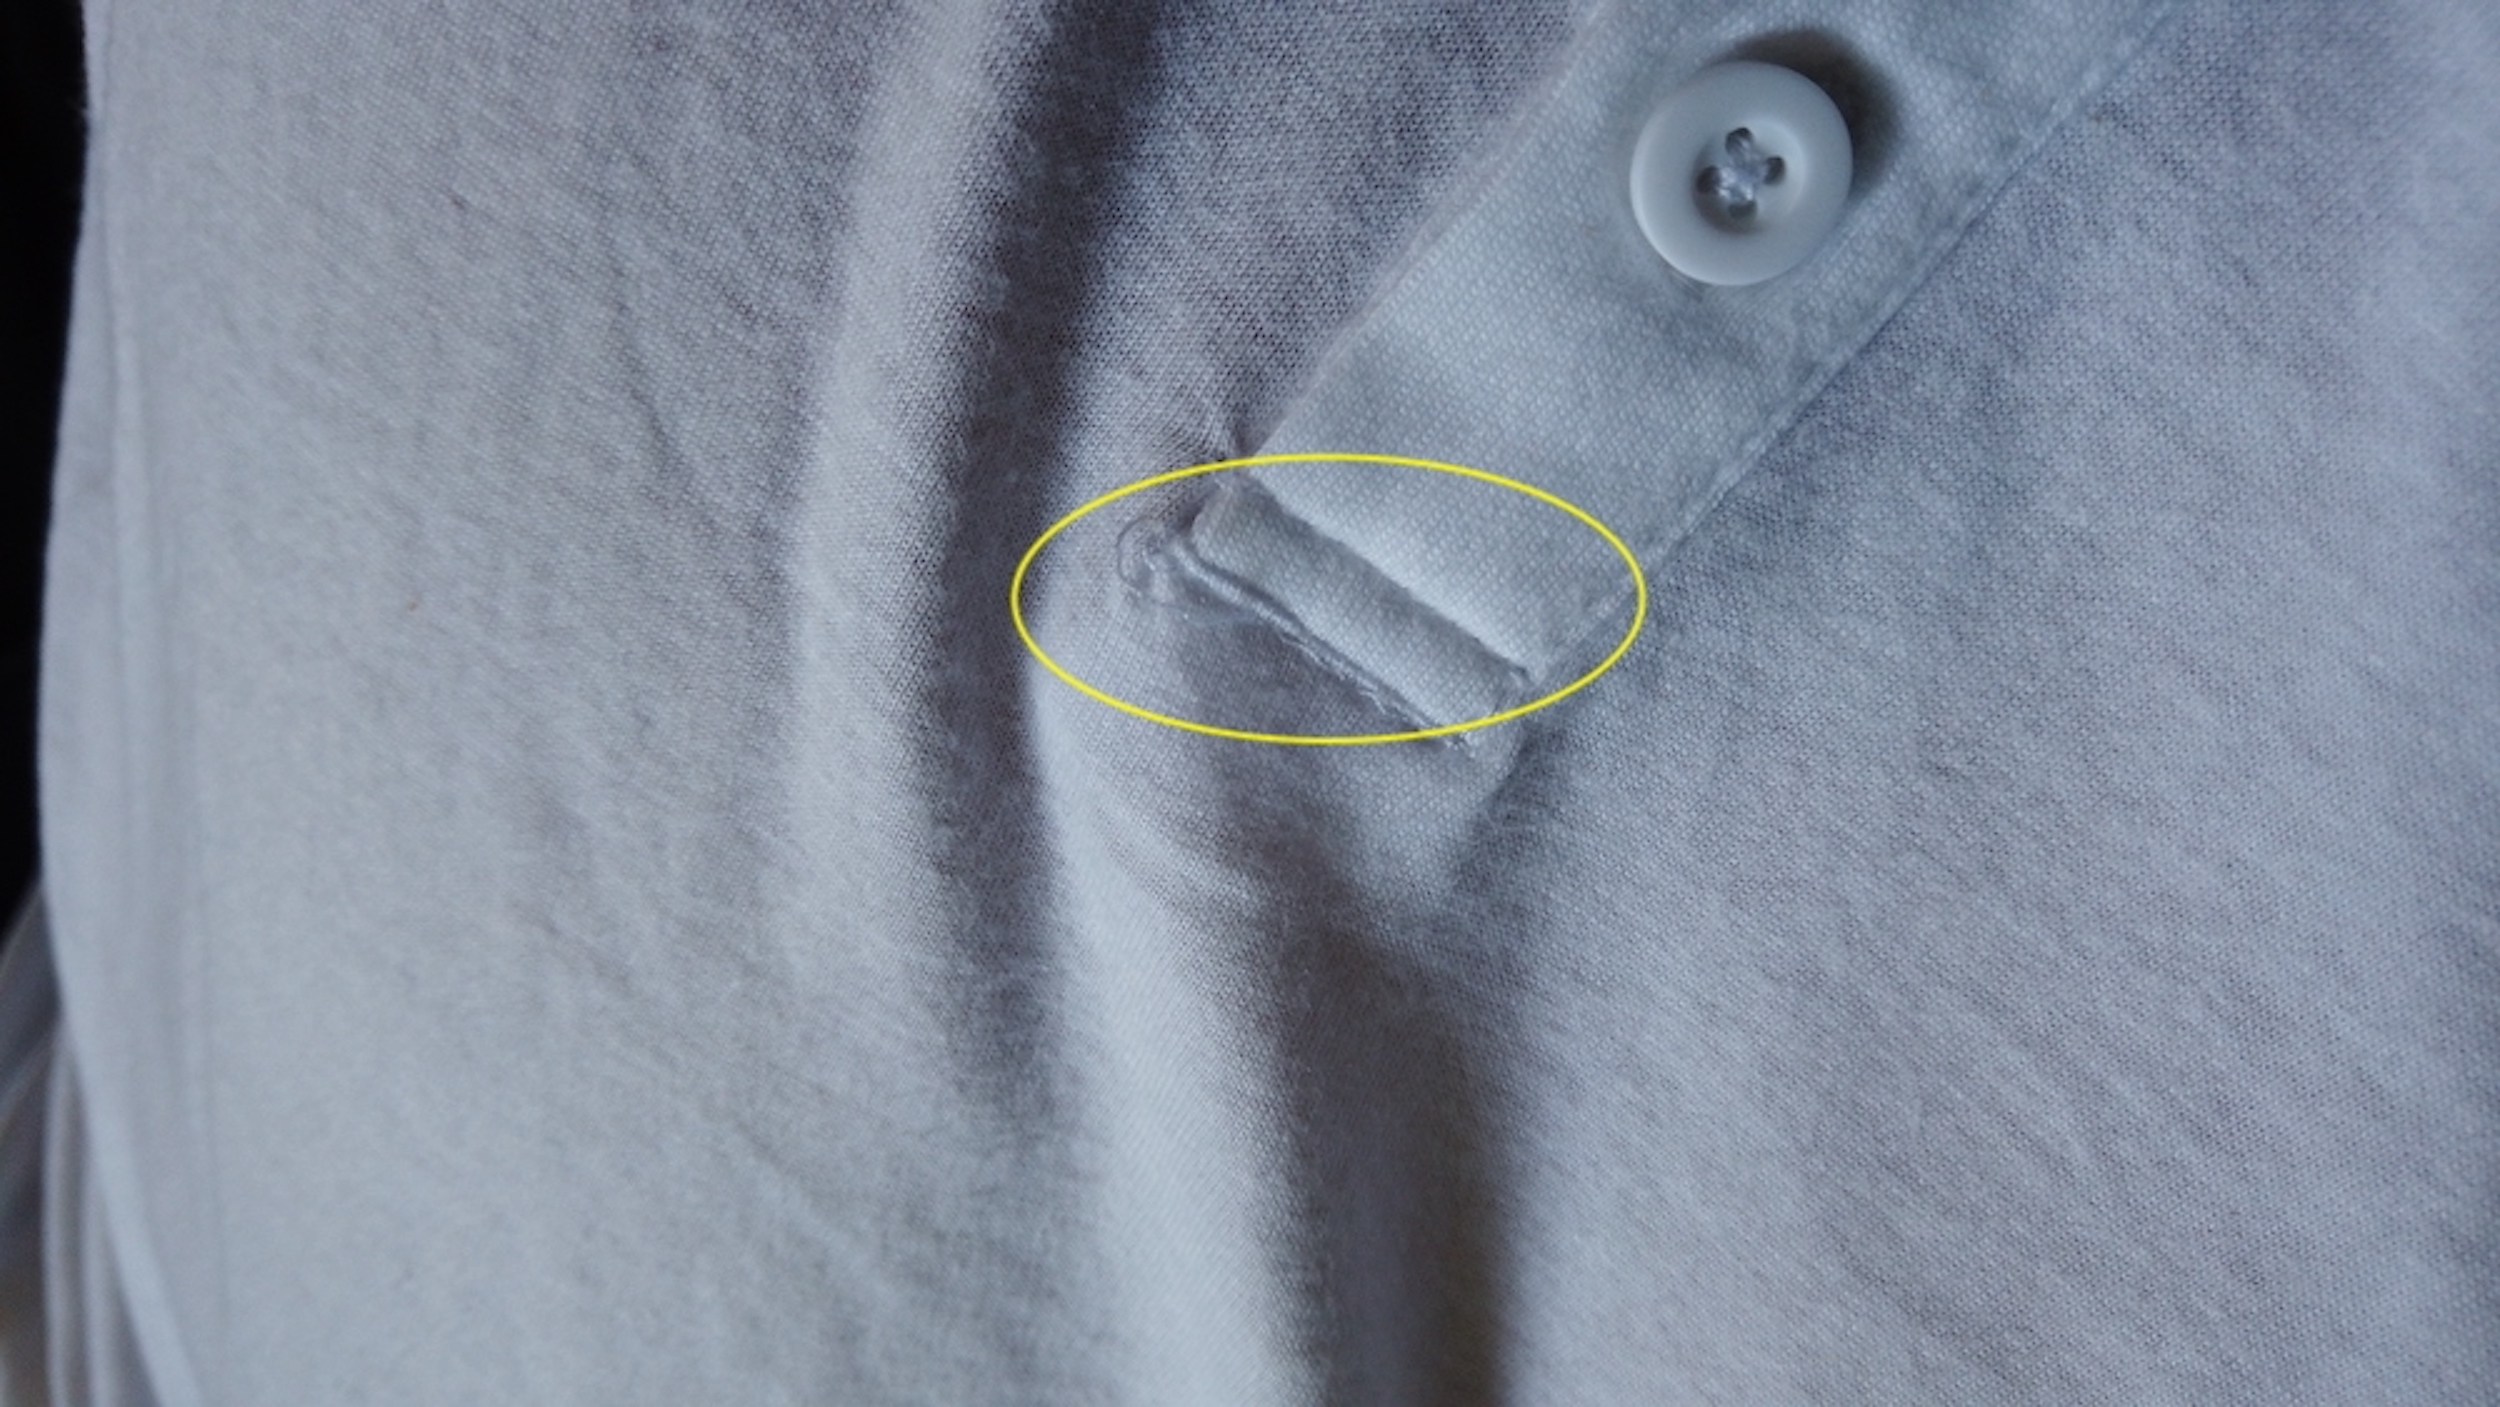 Image shows loose thread on a new long-sleeved henley